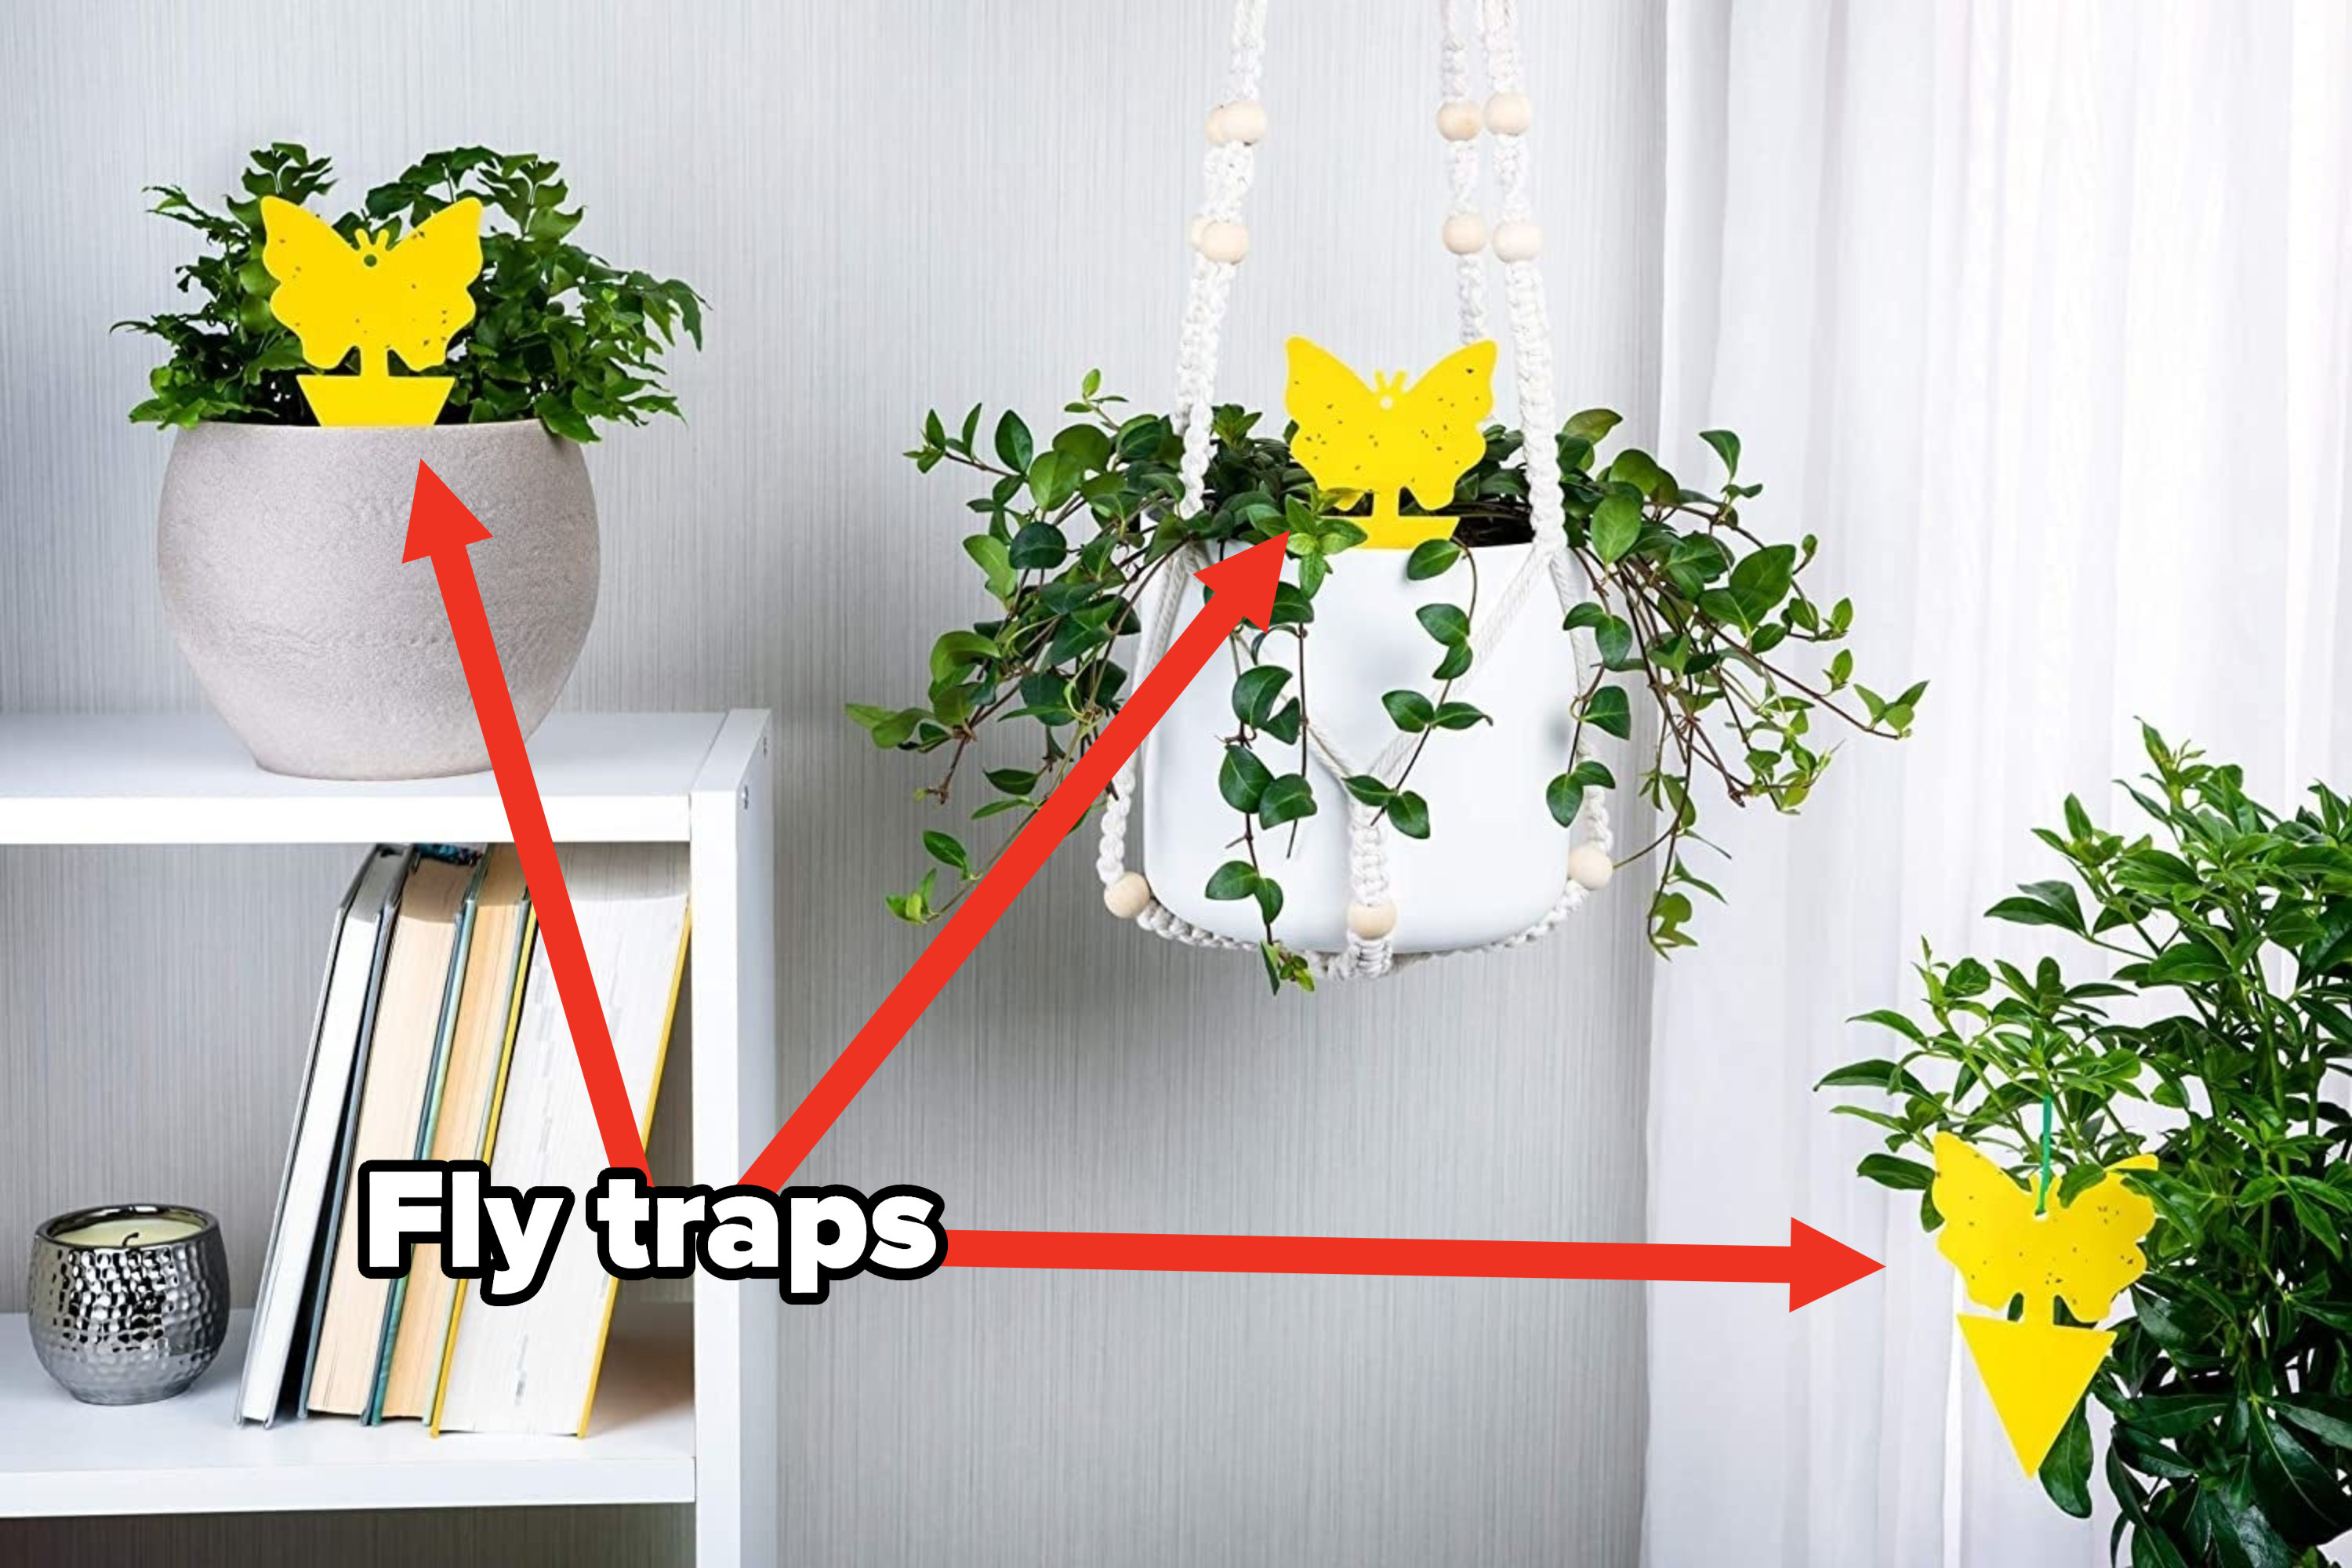 Three butterfly-shaped fly traps in potted plants 